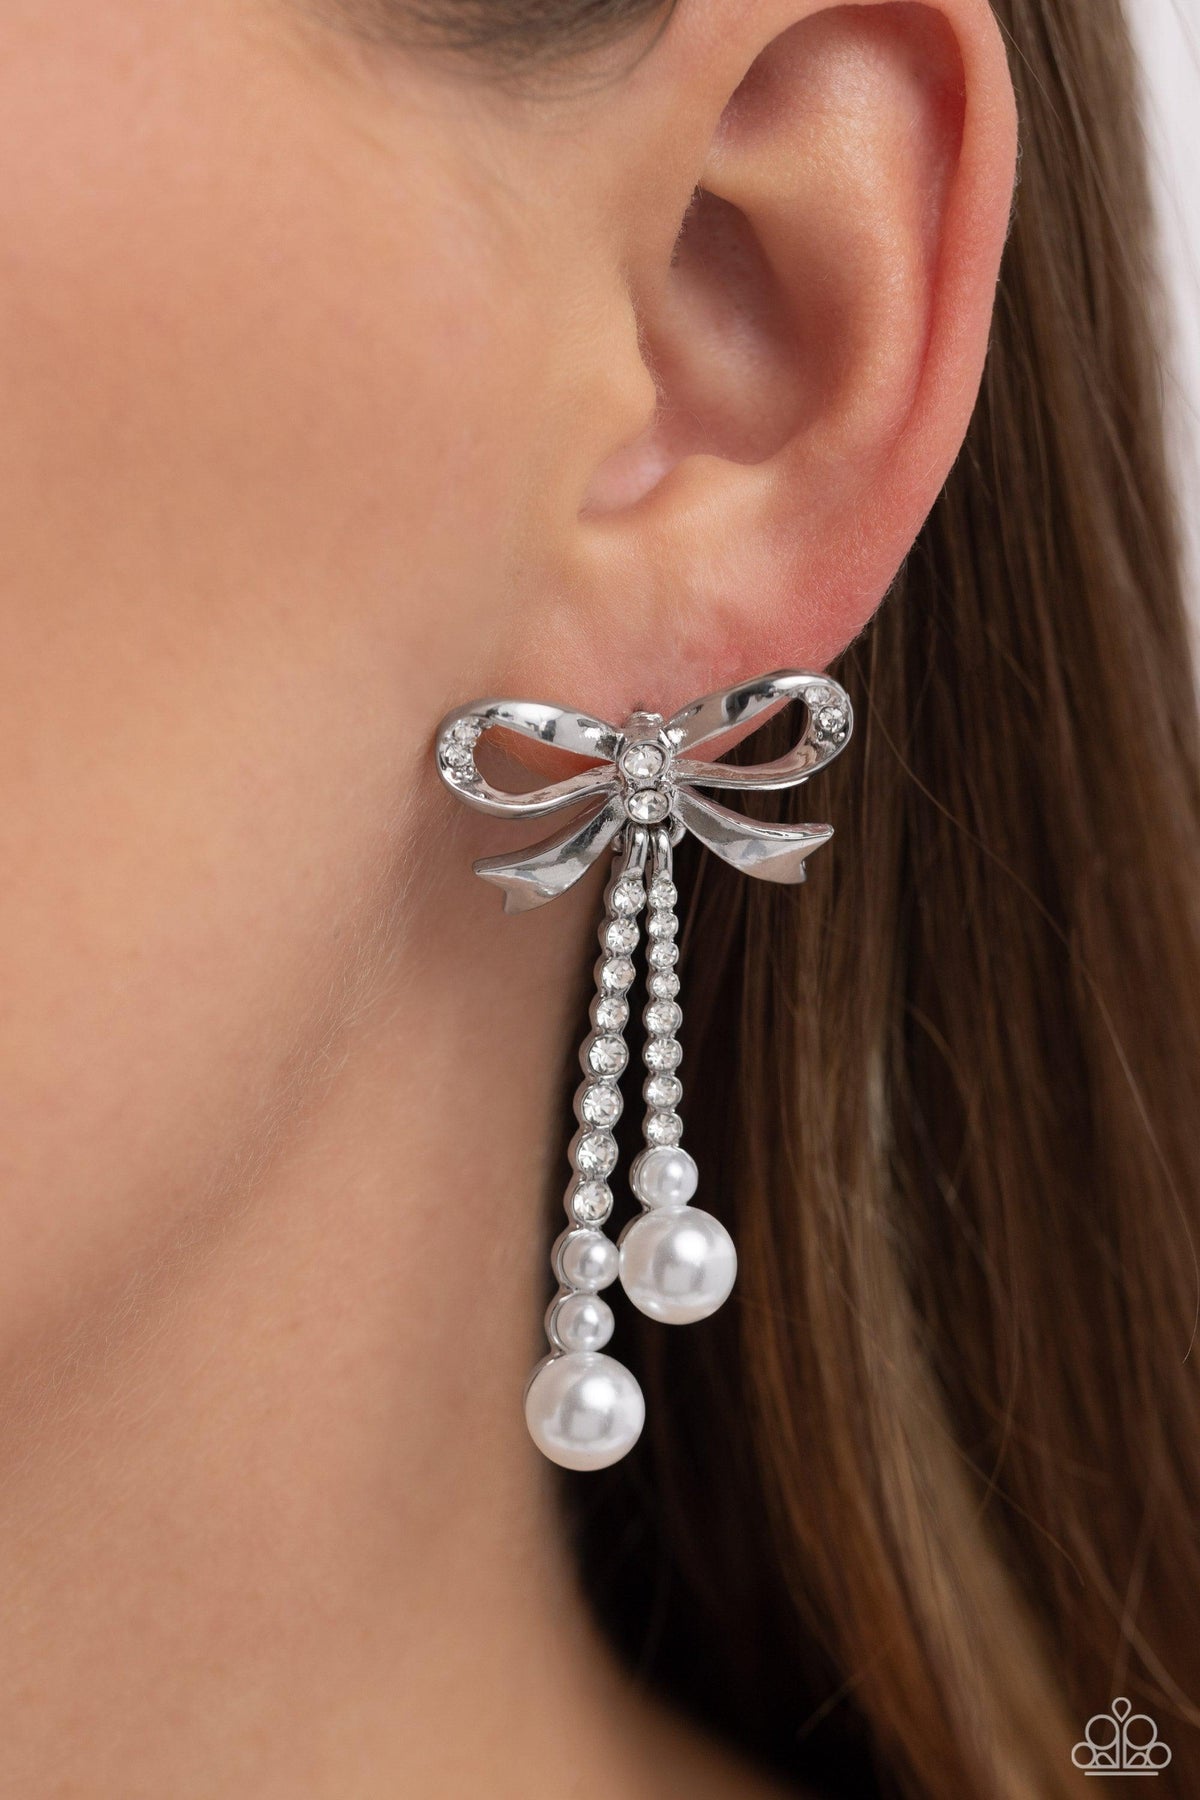 Bodacious Bow White Rhinestone &amp; Pearl Bow Earrings - Paparazzi Accessories-on model - CarasShop.com - $5 Jewelry by Cara Jewels